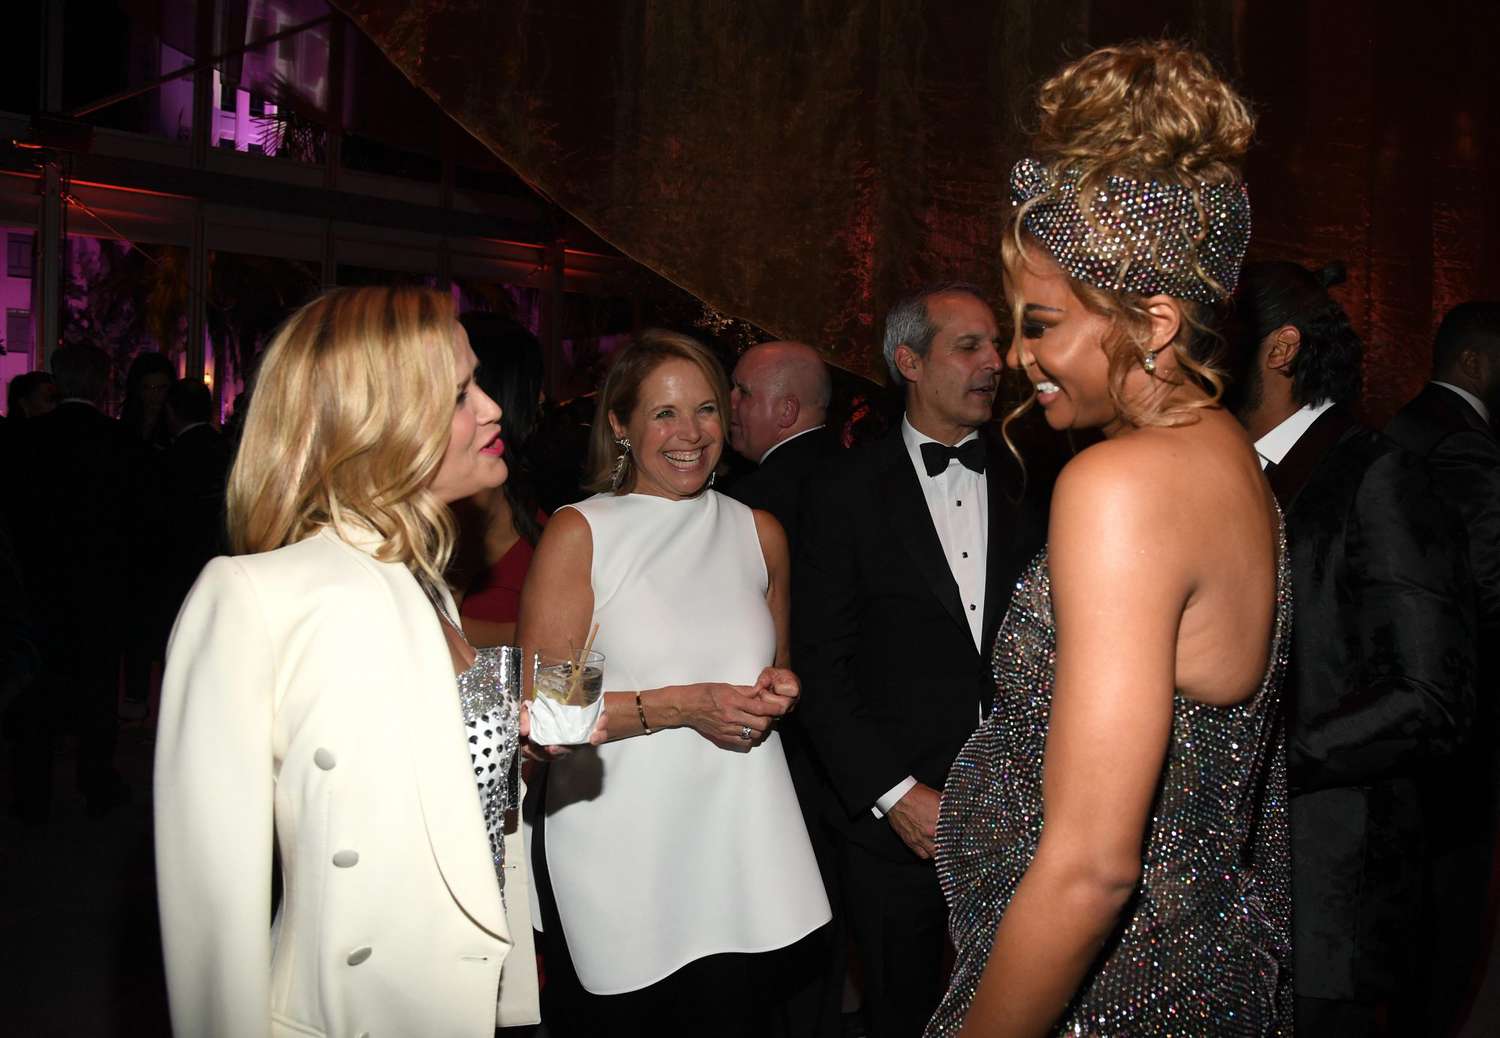 <p>Reese Witherspoon and Katie Couric appear to be asking Ciara if they can see her "One, Two, Step" later at the Vanity Fair party.</p>
                            